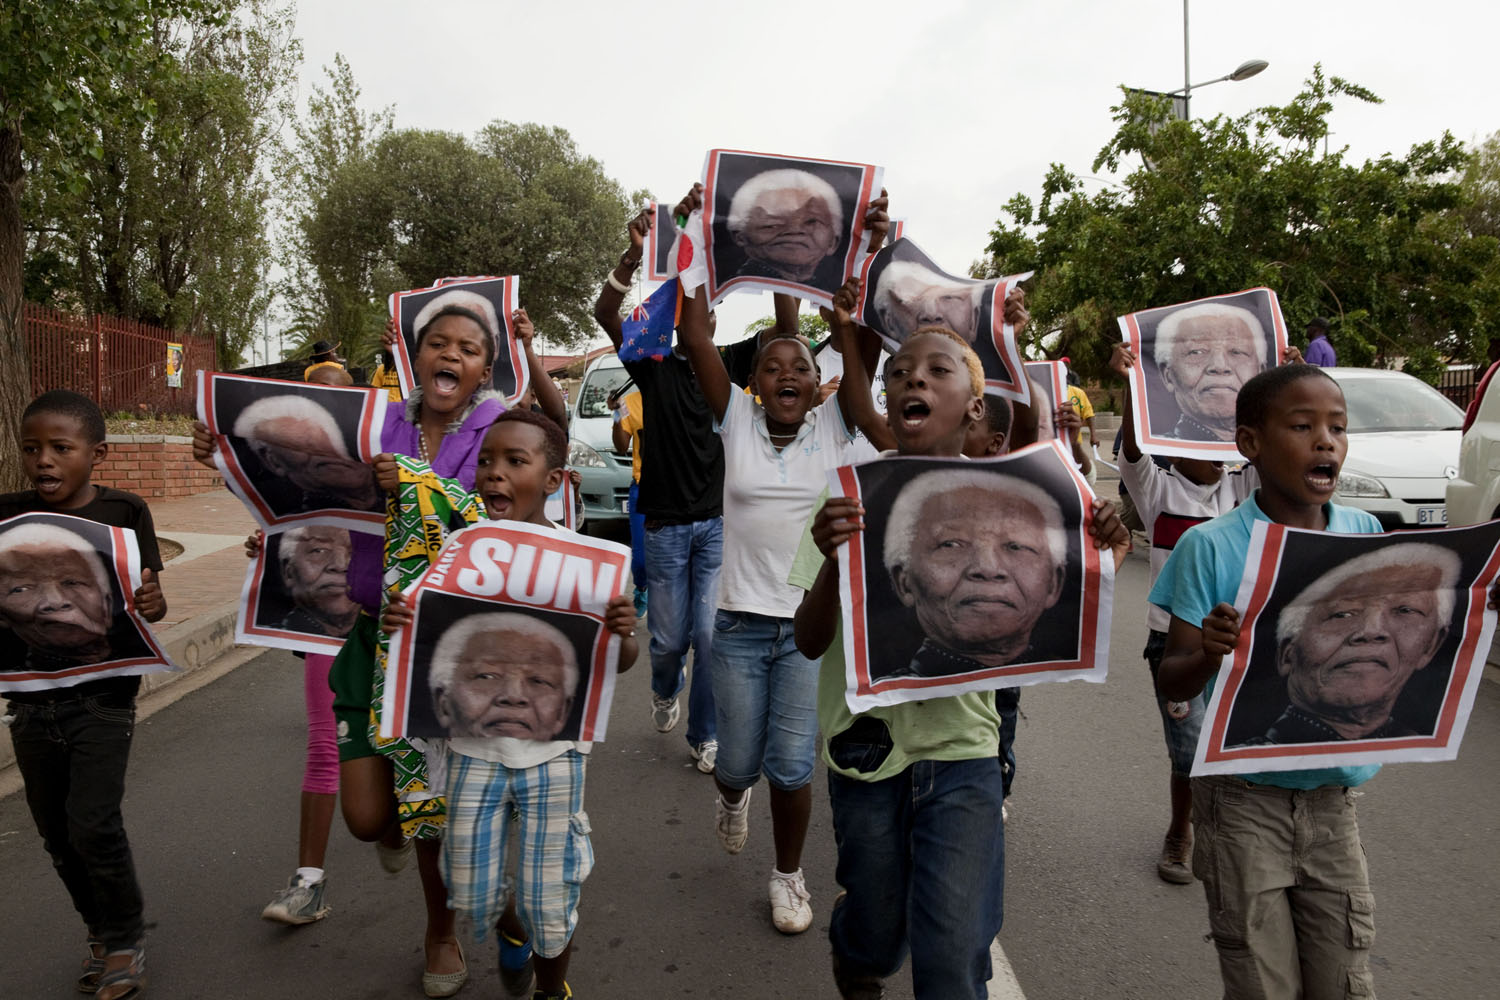 SOUTH AFRICA. Soweto. December 6, 2013. Reaction to the death of Nelson Mandela on the streets outside of his former home.